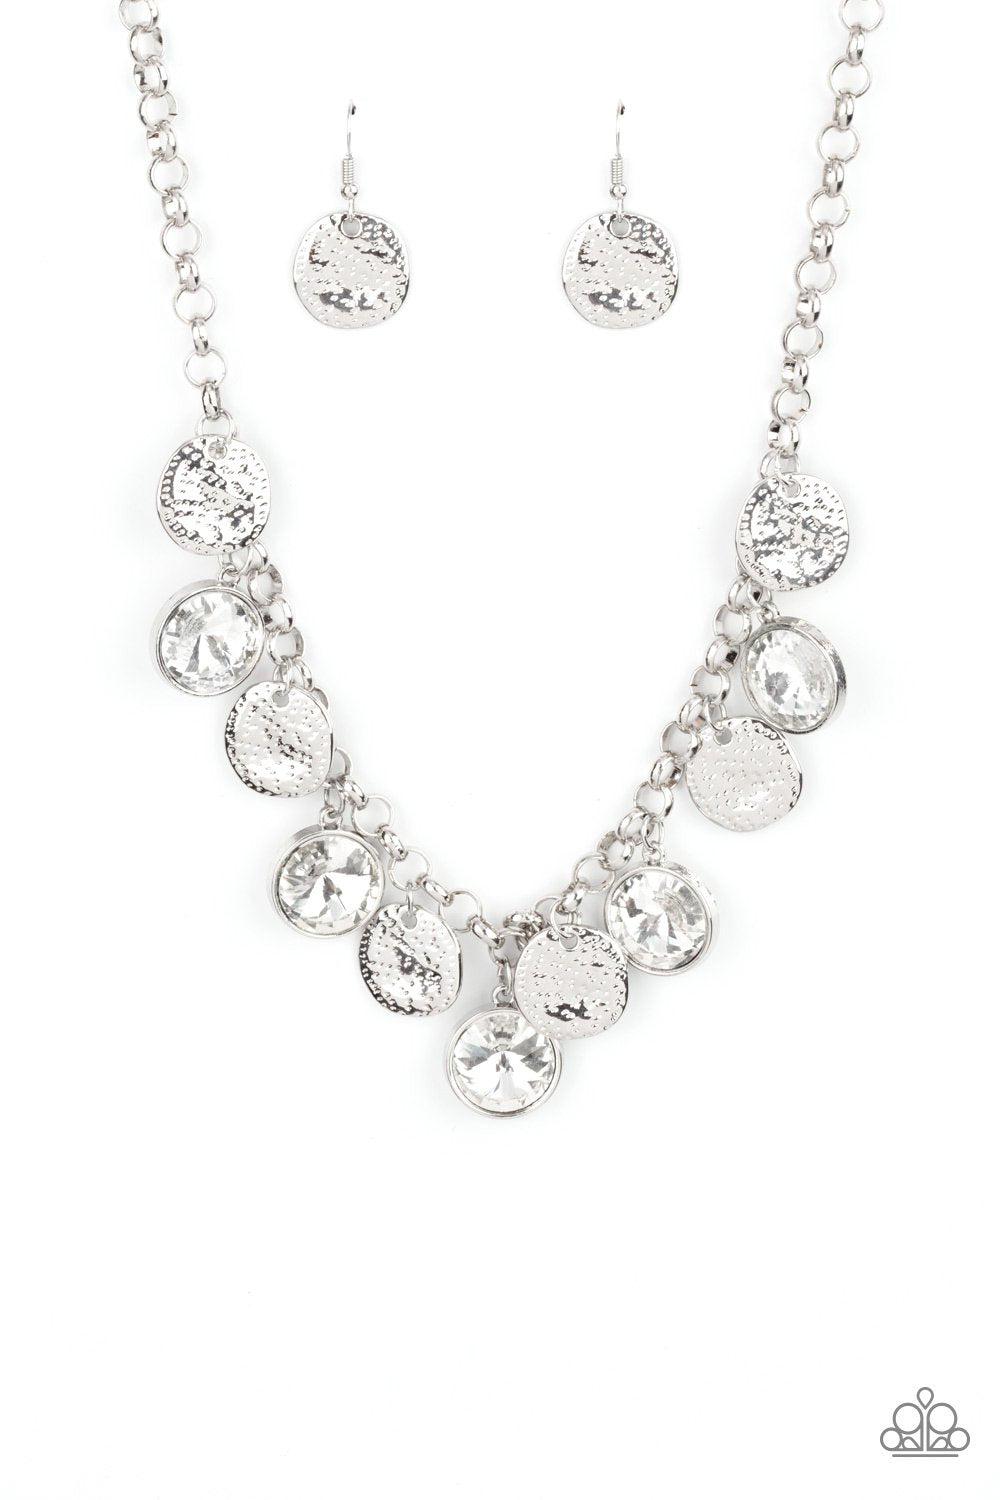 Spot On Sparkle White Rhinestone and Silver Necklace - Paparazzi Accessories 2021 Convention Exclusive- lightbox - CarasShop.com - $5 Jewelry by Cara Jewels